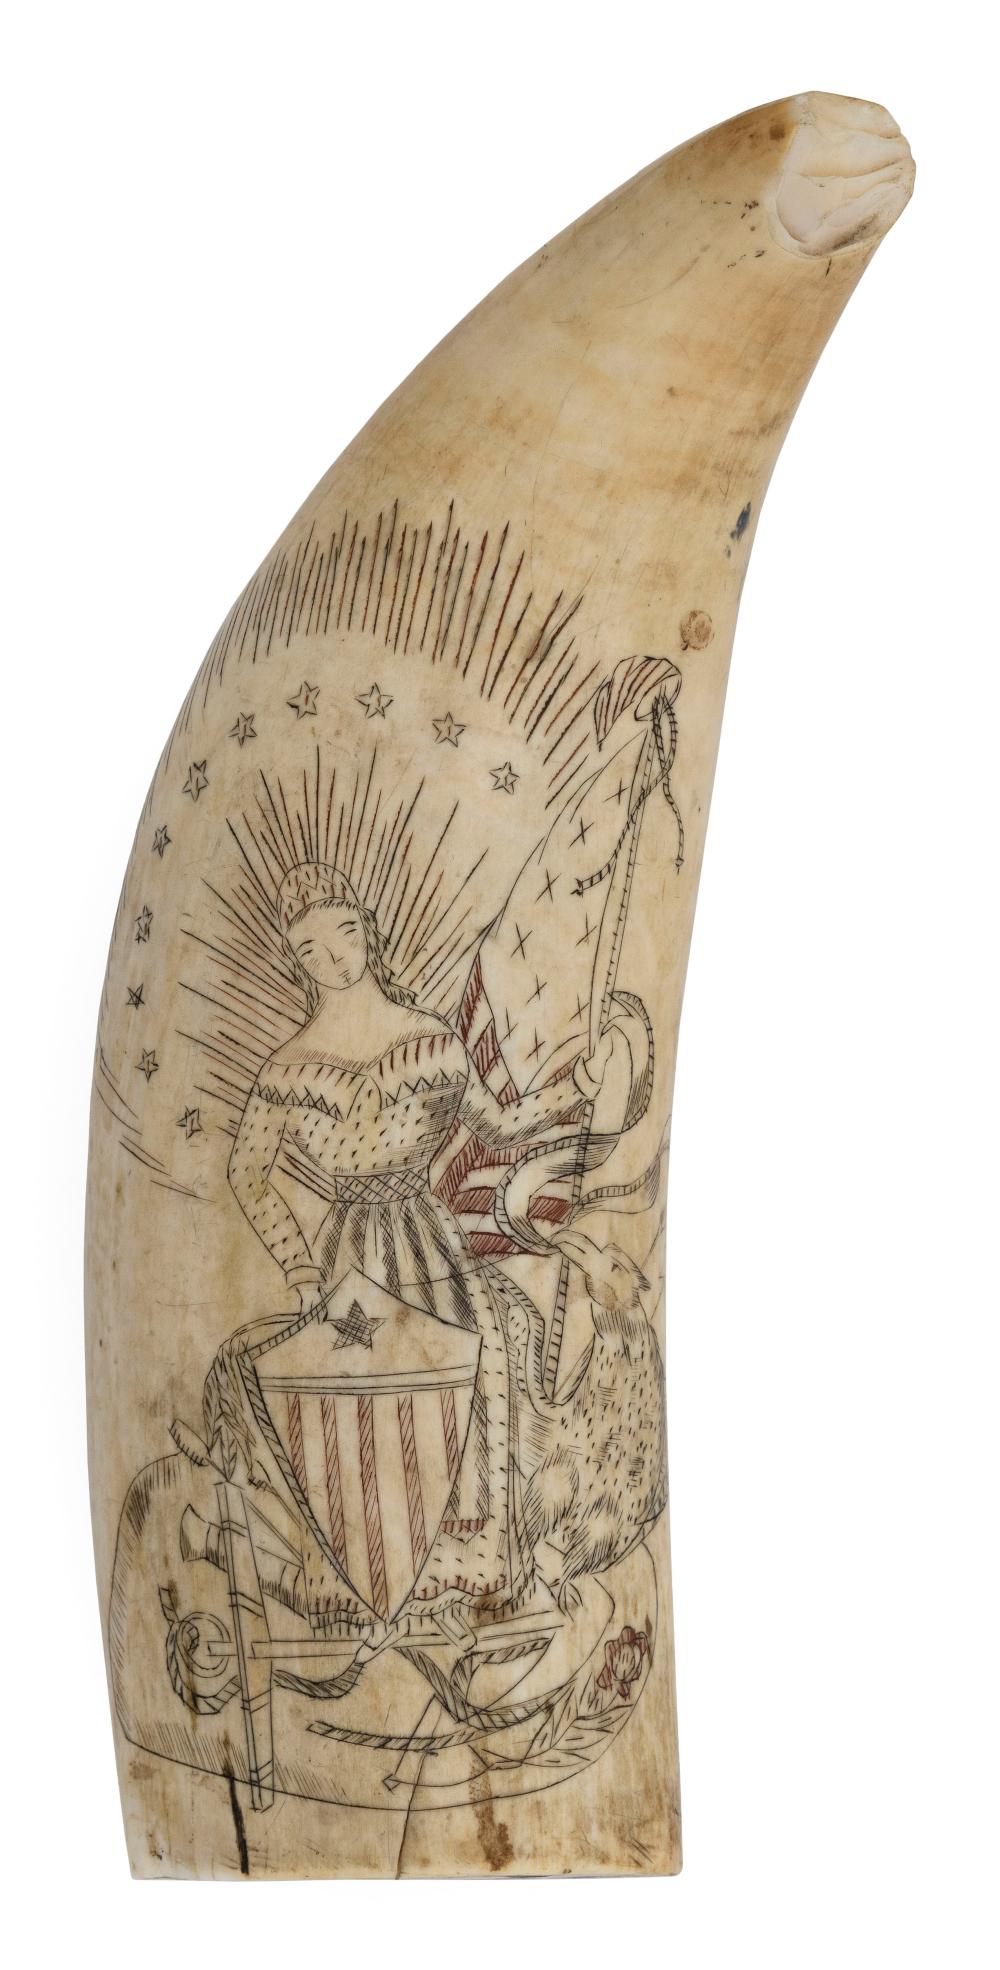 POLYCHROME SCRIMSHAW WHALE S TOOTH 3501a3